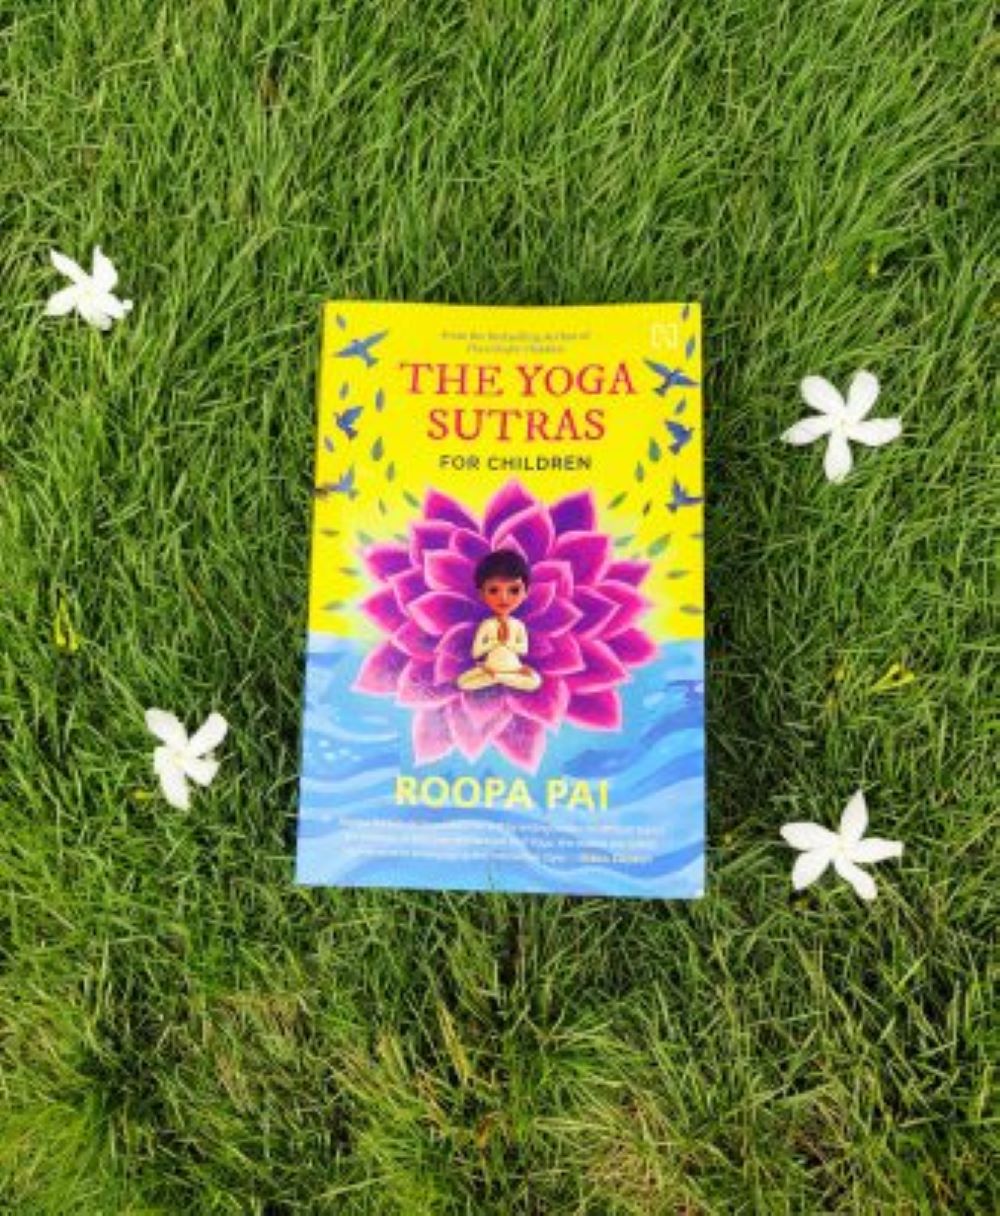 Review: Roopa Pai’s The Yoga Sutras for Children